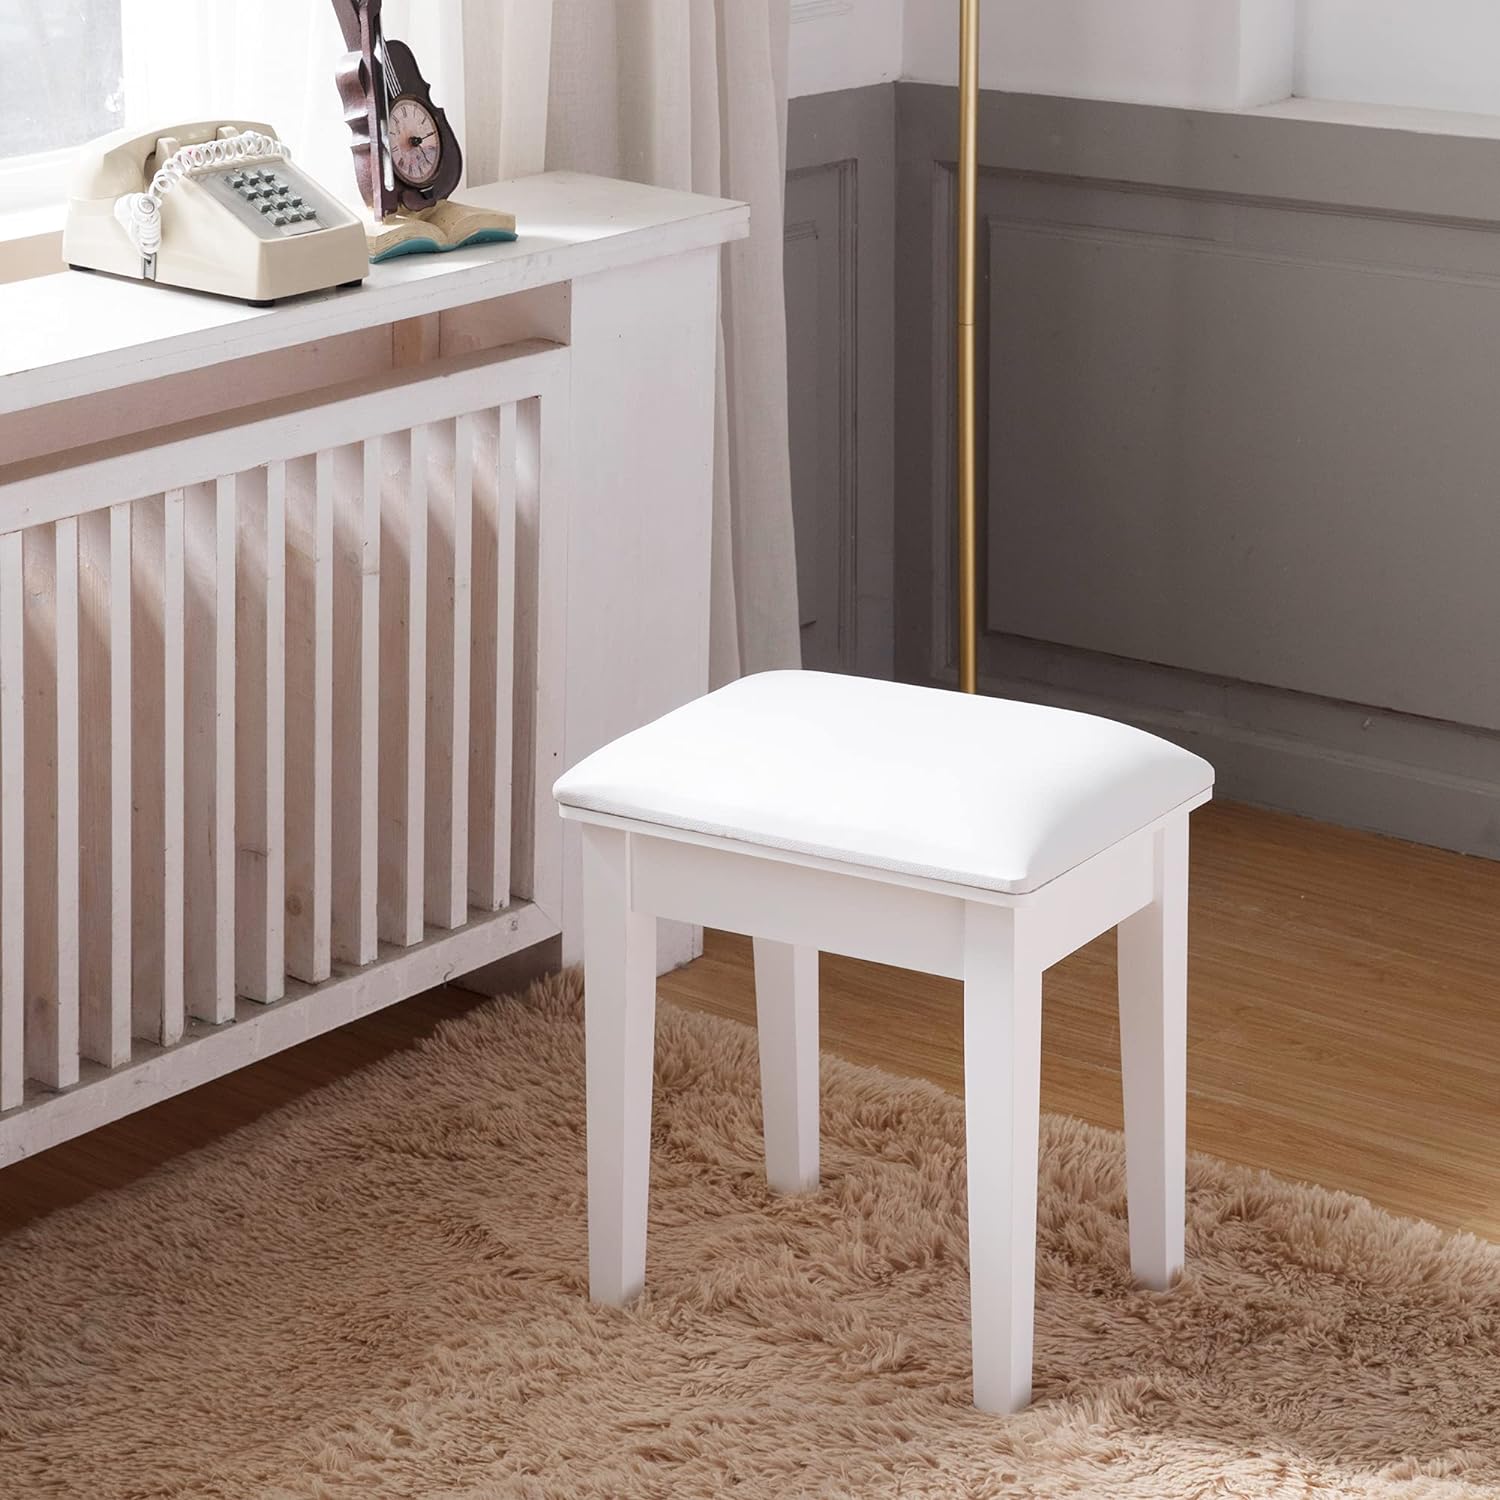  Organizedlife Vanity Stool Wood Dressing PU Padded Chair Makeup Piano Seat Make Up Bench for Dressing Solid Wood Legs,White 